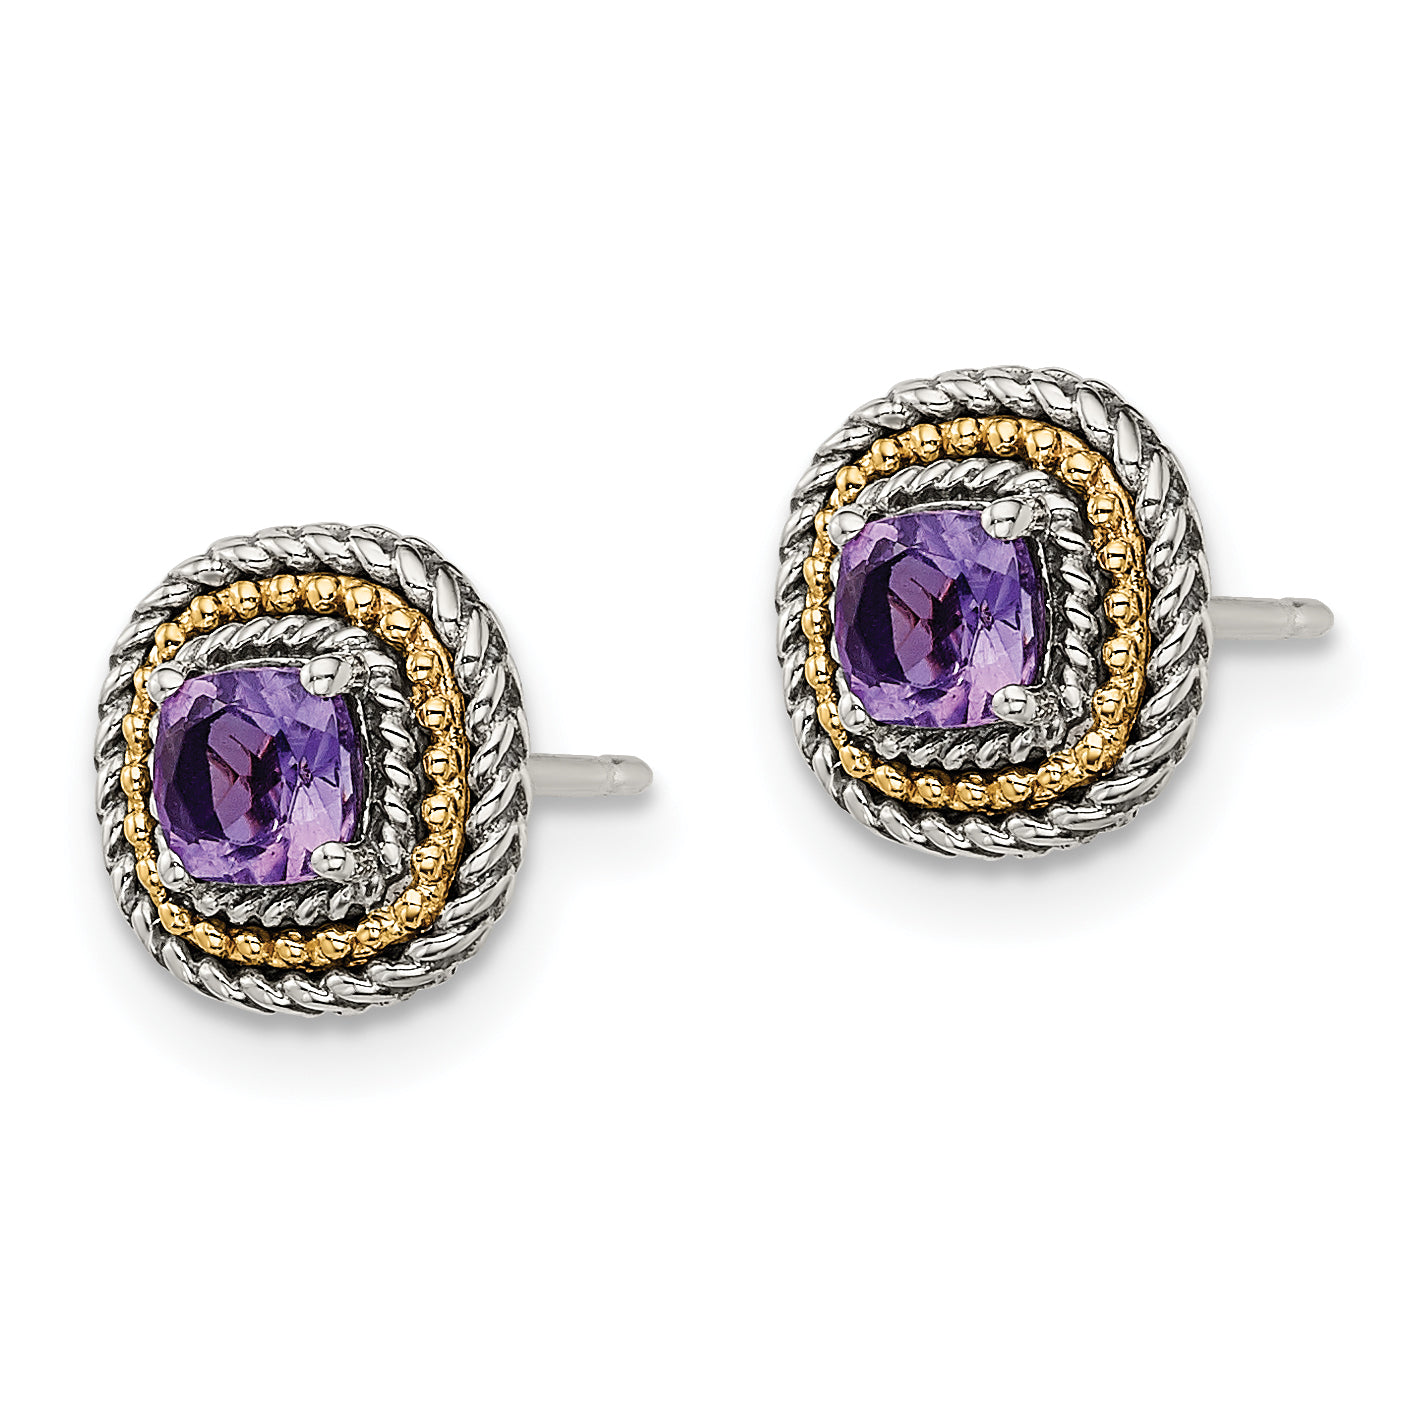 Shey Couture Sterling Silver with 14K Accent Antiqued Cushion Amethyst Post Earrings